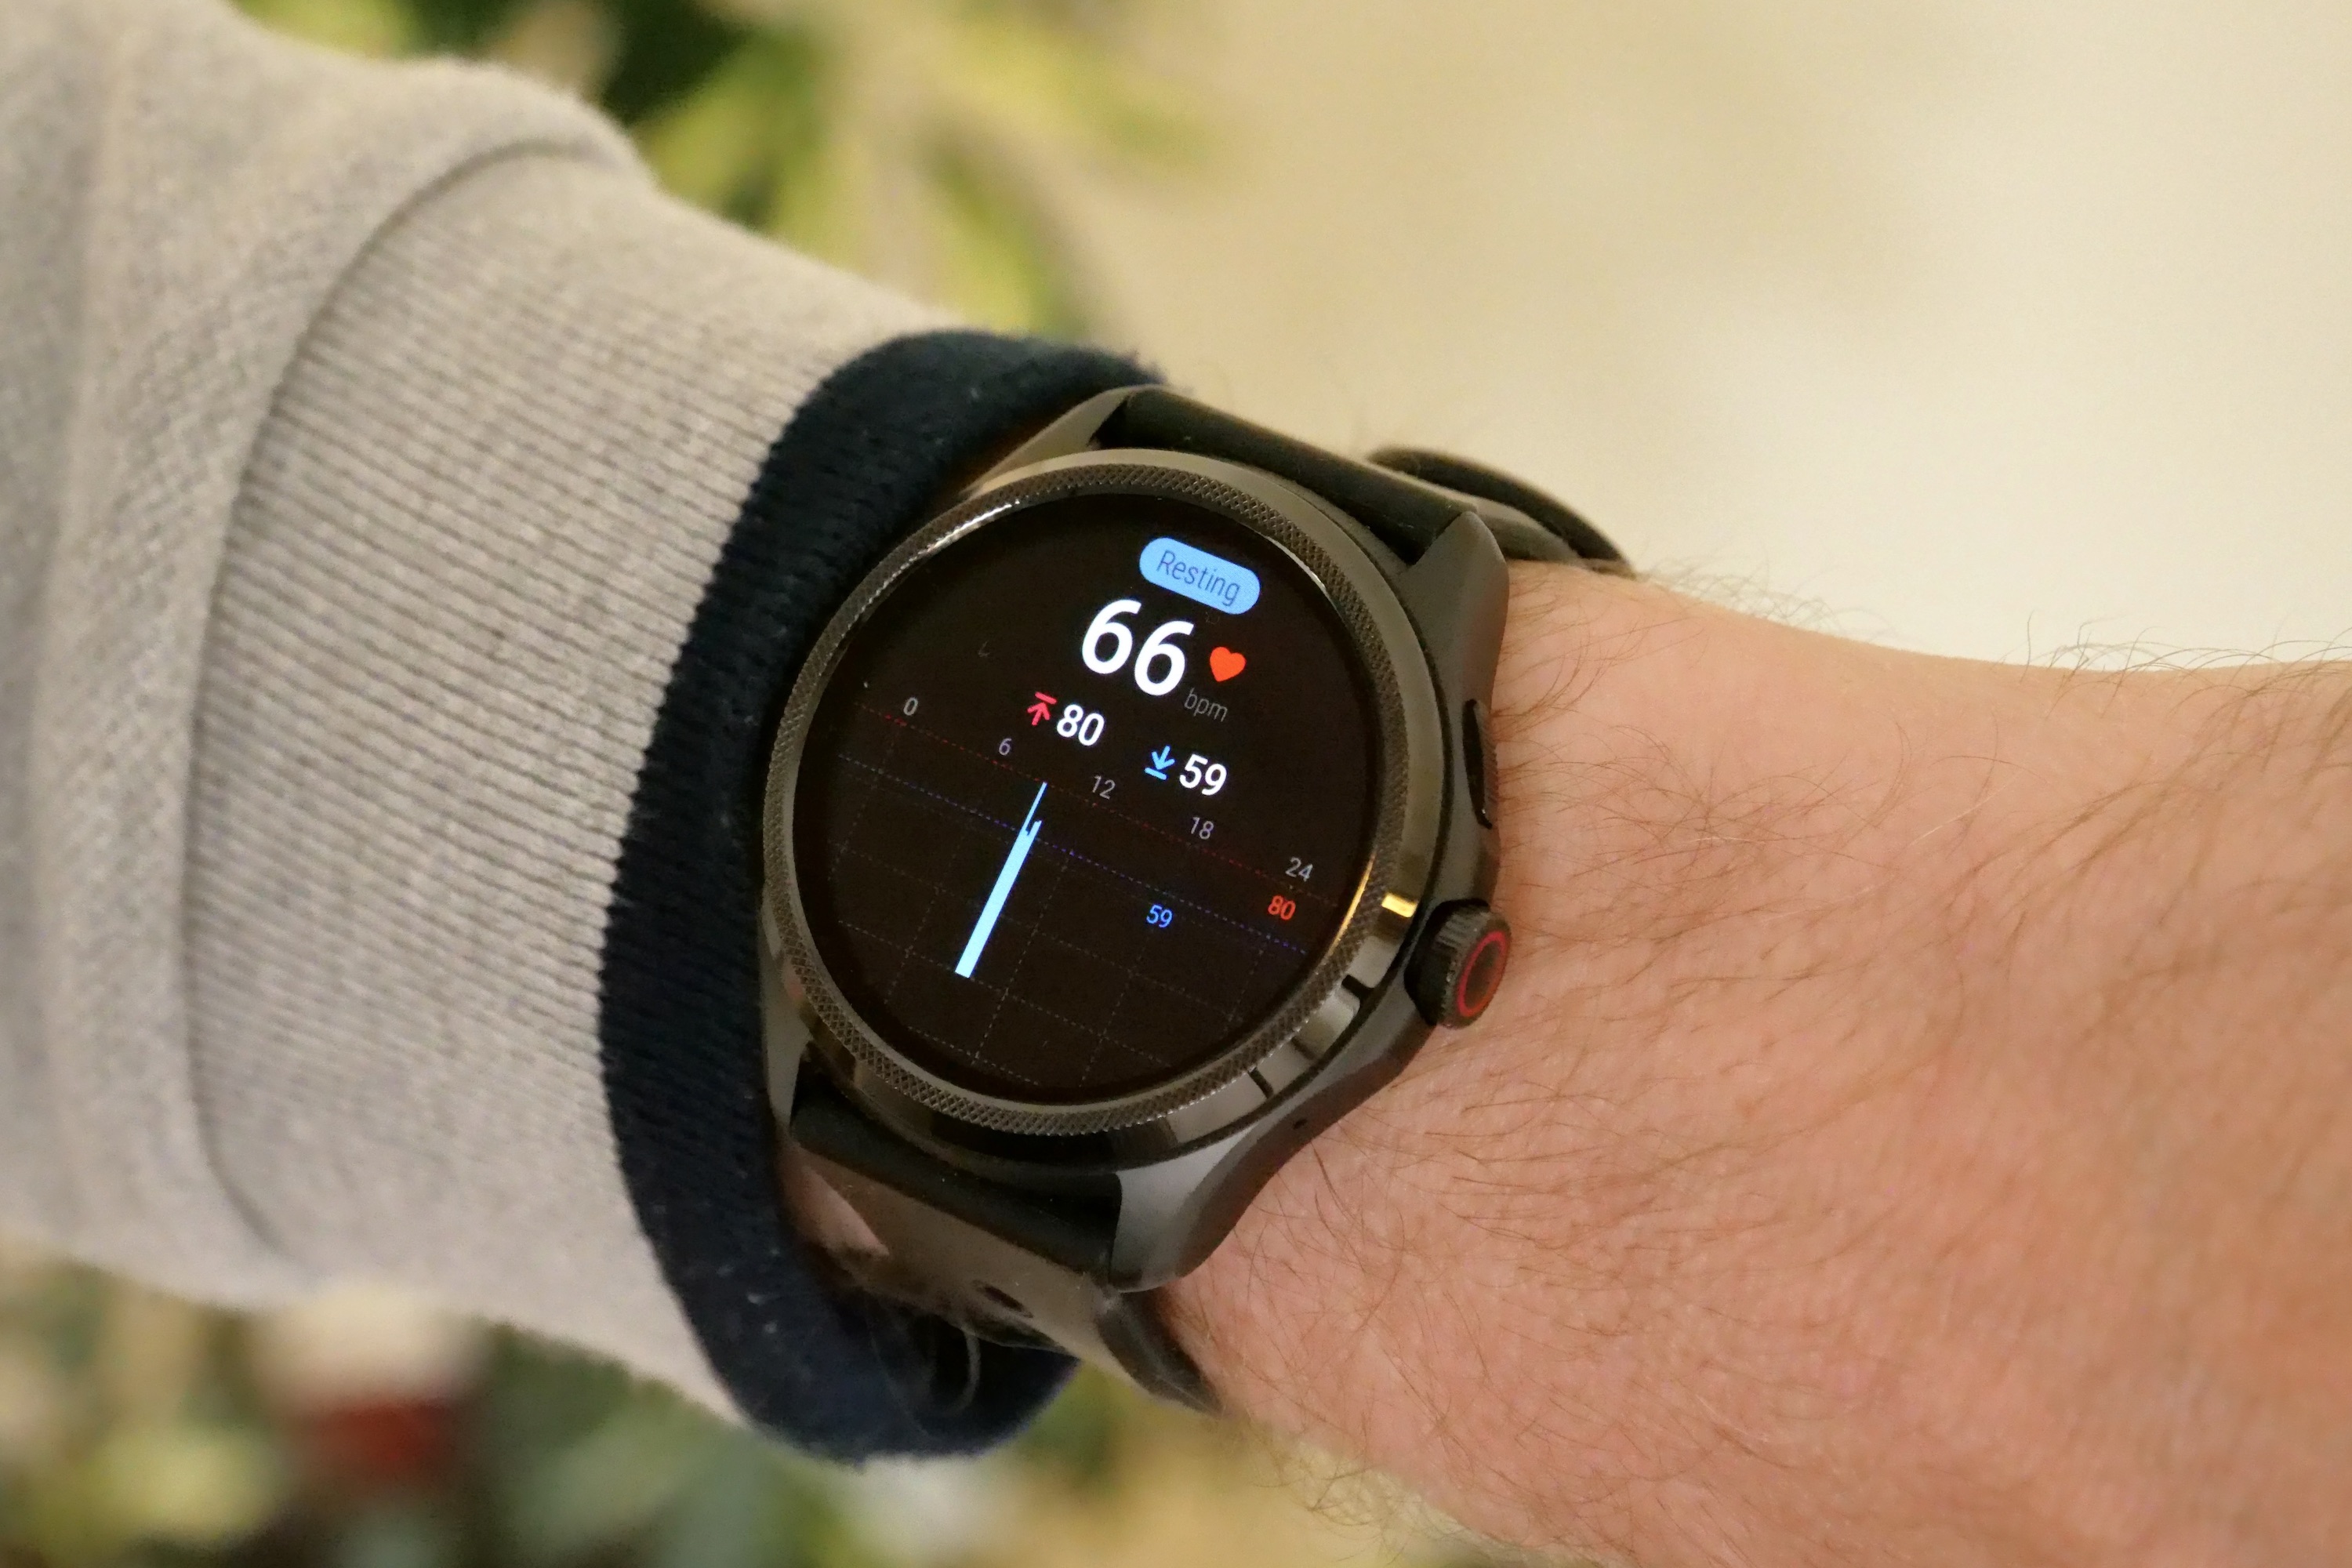 TicWatch Pro 5 Review: A Big WearOS Watch with Battery Life Tricks - CNET